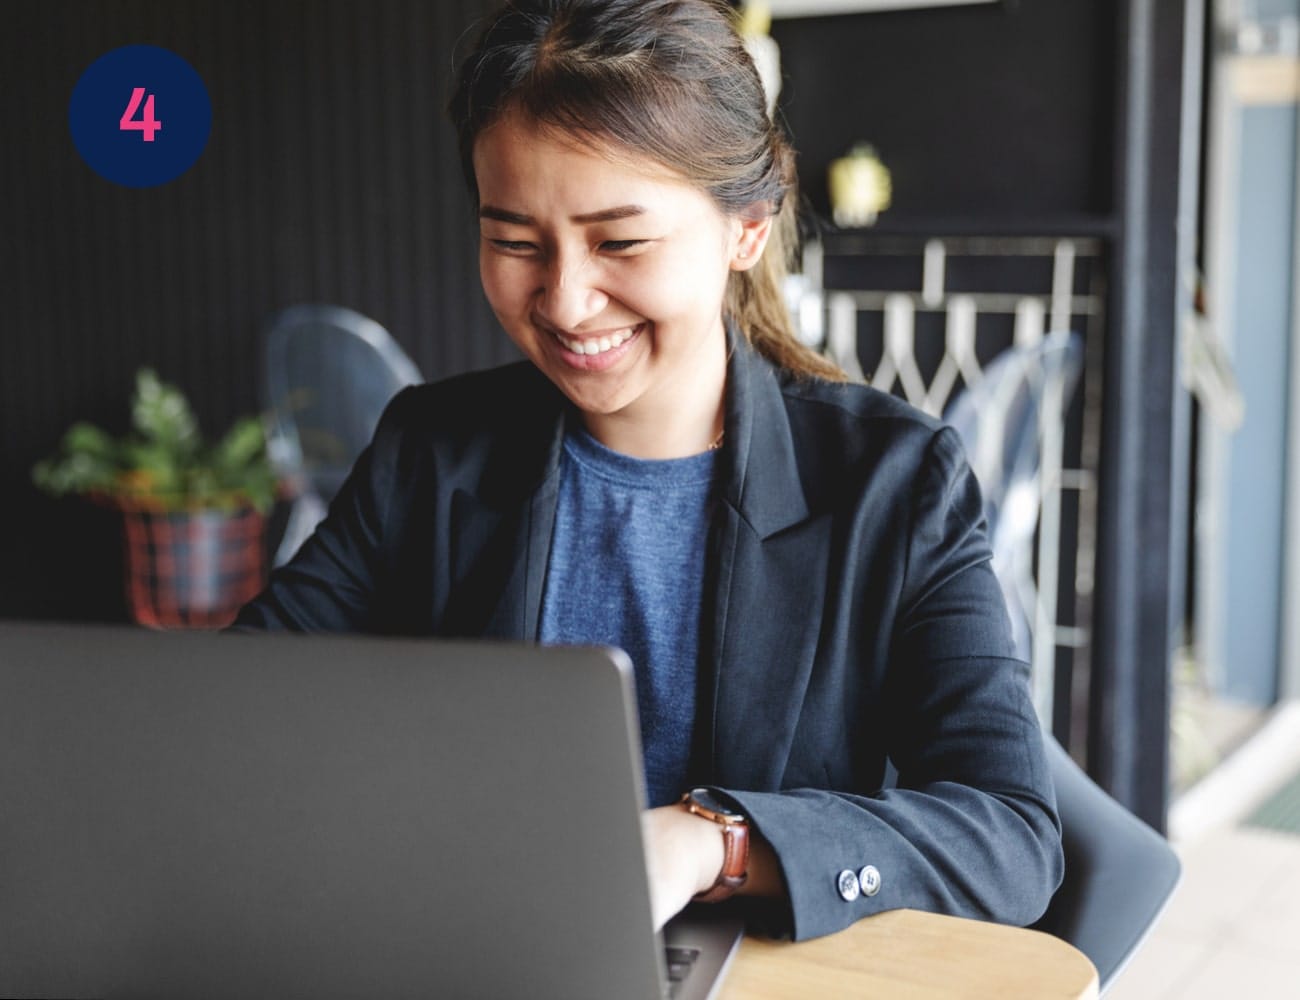 A smartly dressed young woman smiles while working on a laptop #Clue: your hidden letter is the first in the alphabet! Got it? Easy... Now find image 6